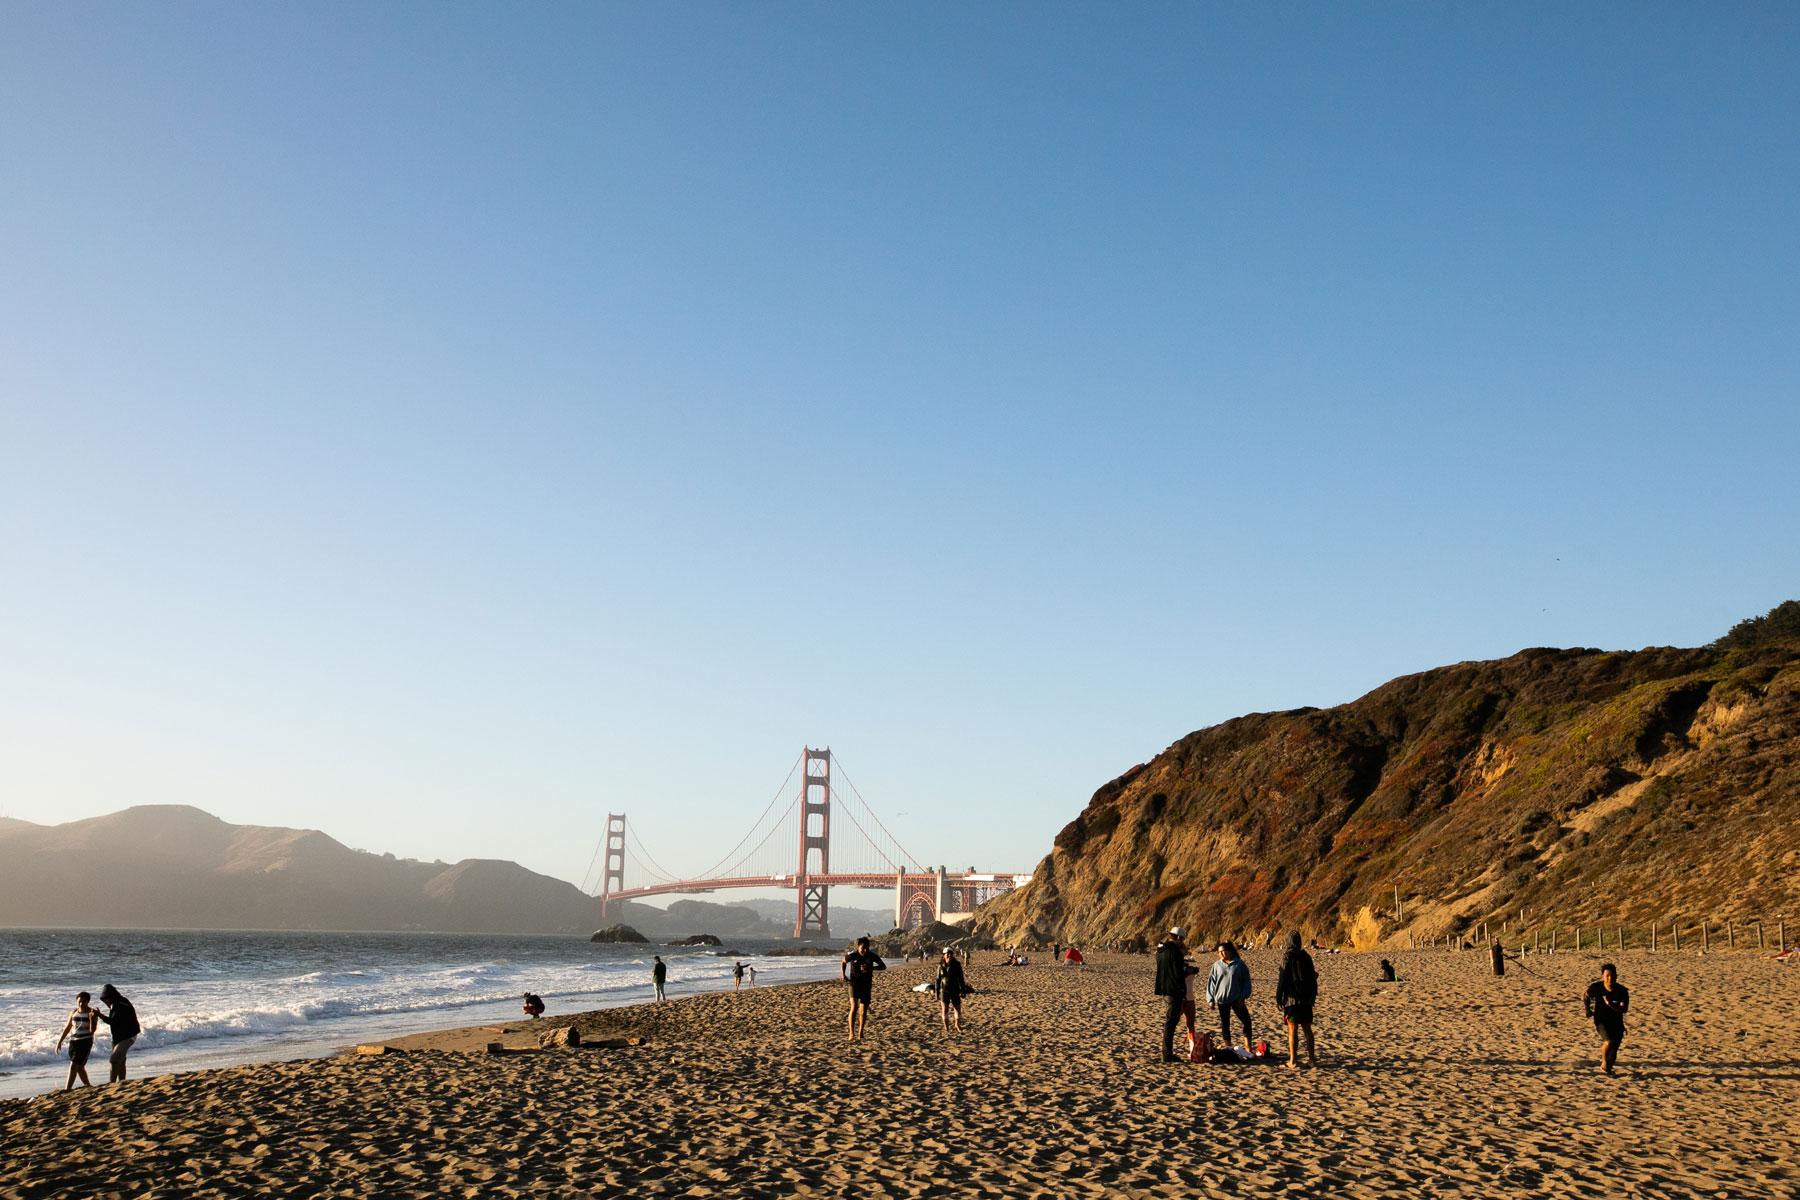 Visitors enjoying the sand and waves at Baker Beach. Photo by Myleen Hollero.